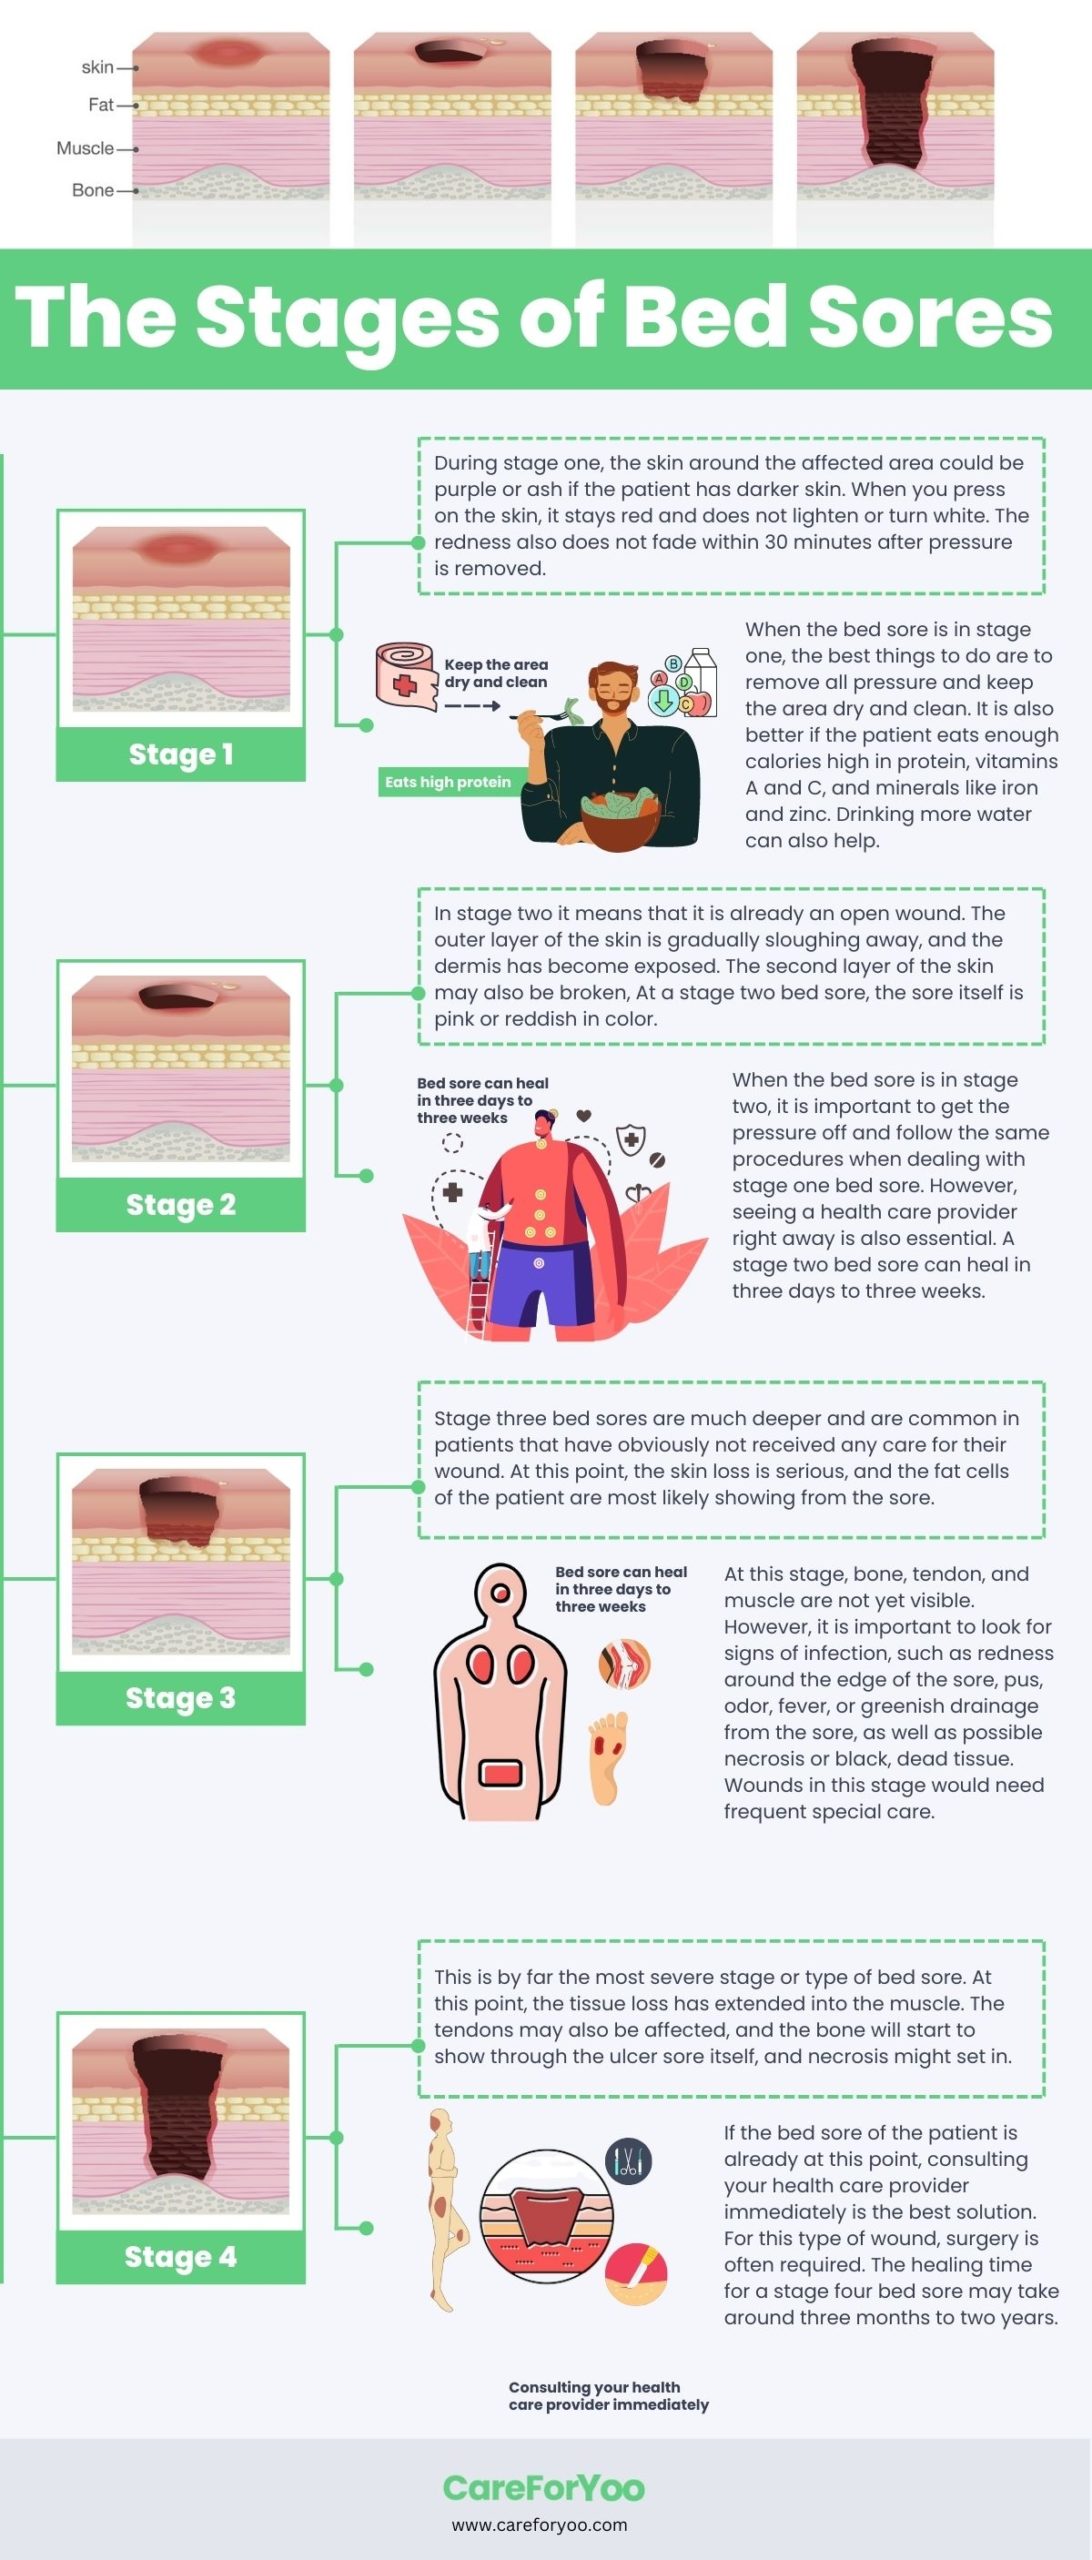 An illustrated sheet explaining the different stages of bedsores and how to care for them.